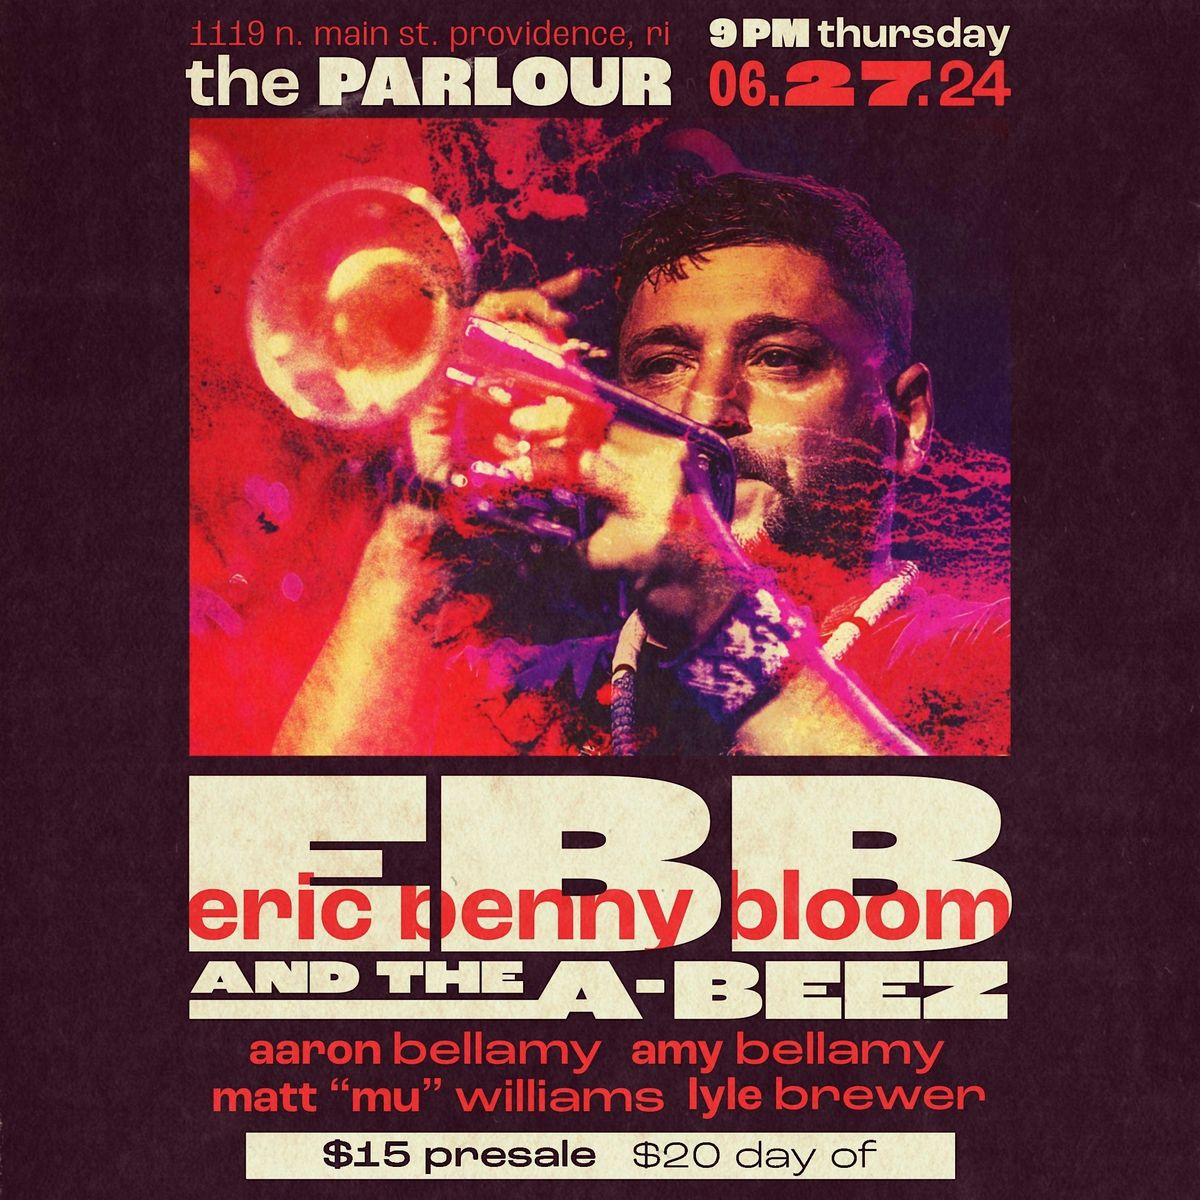 ERIC BENNY BLOOM AND THE A-BEEZ LIVE AT THE PARLOUR